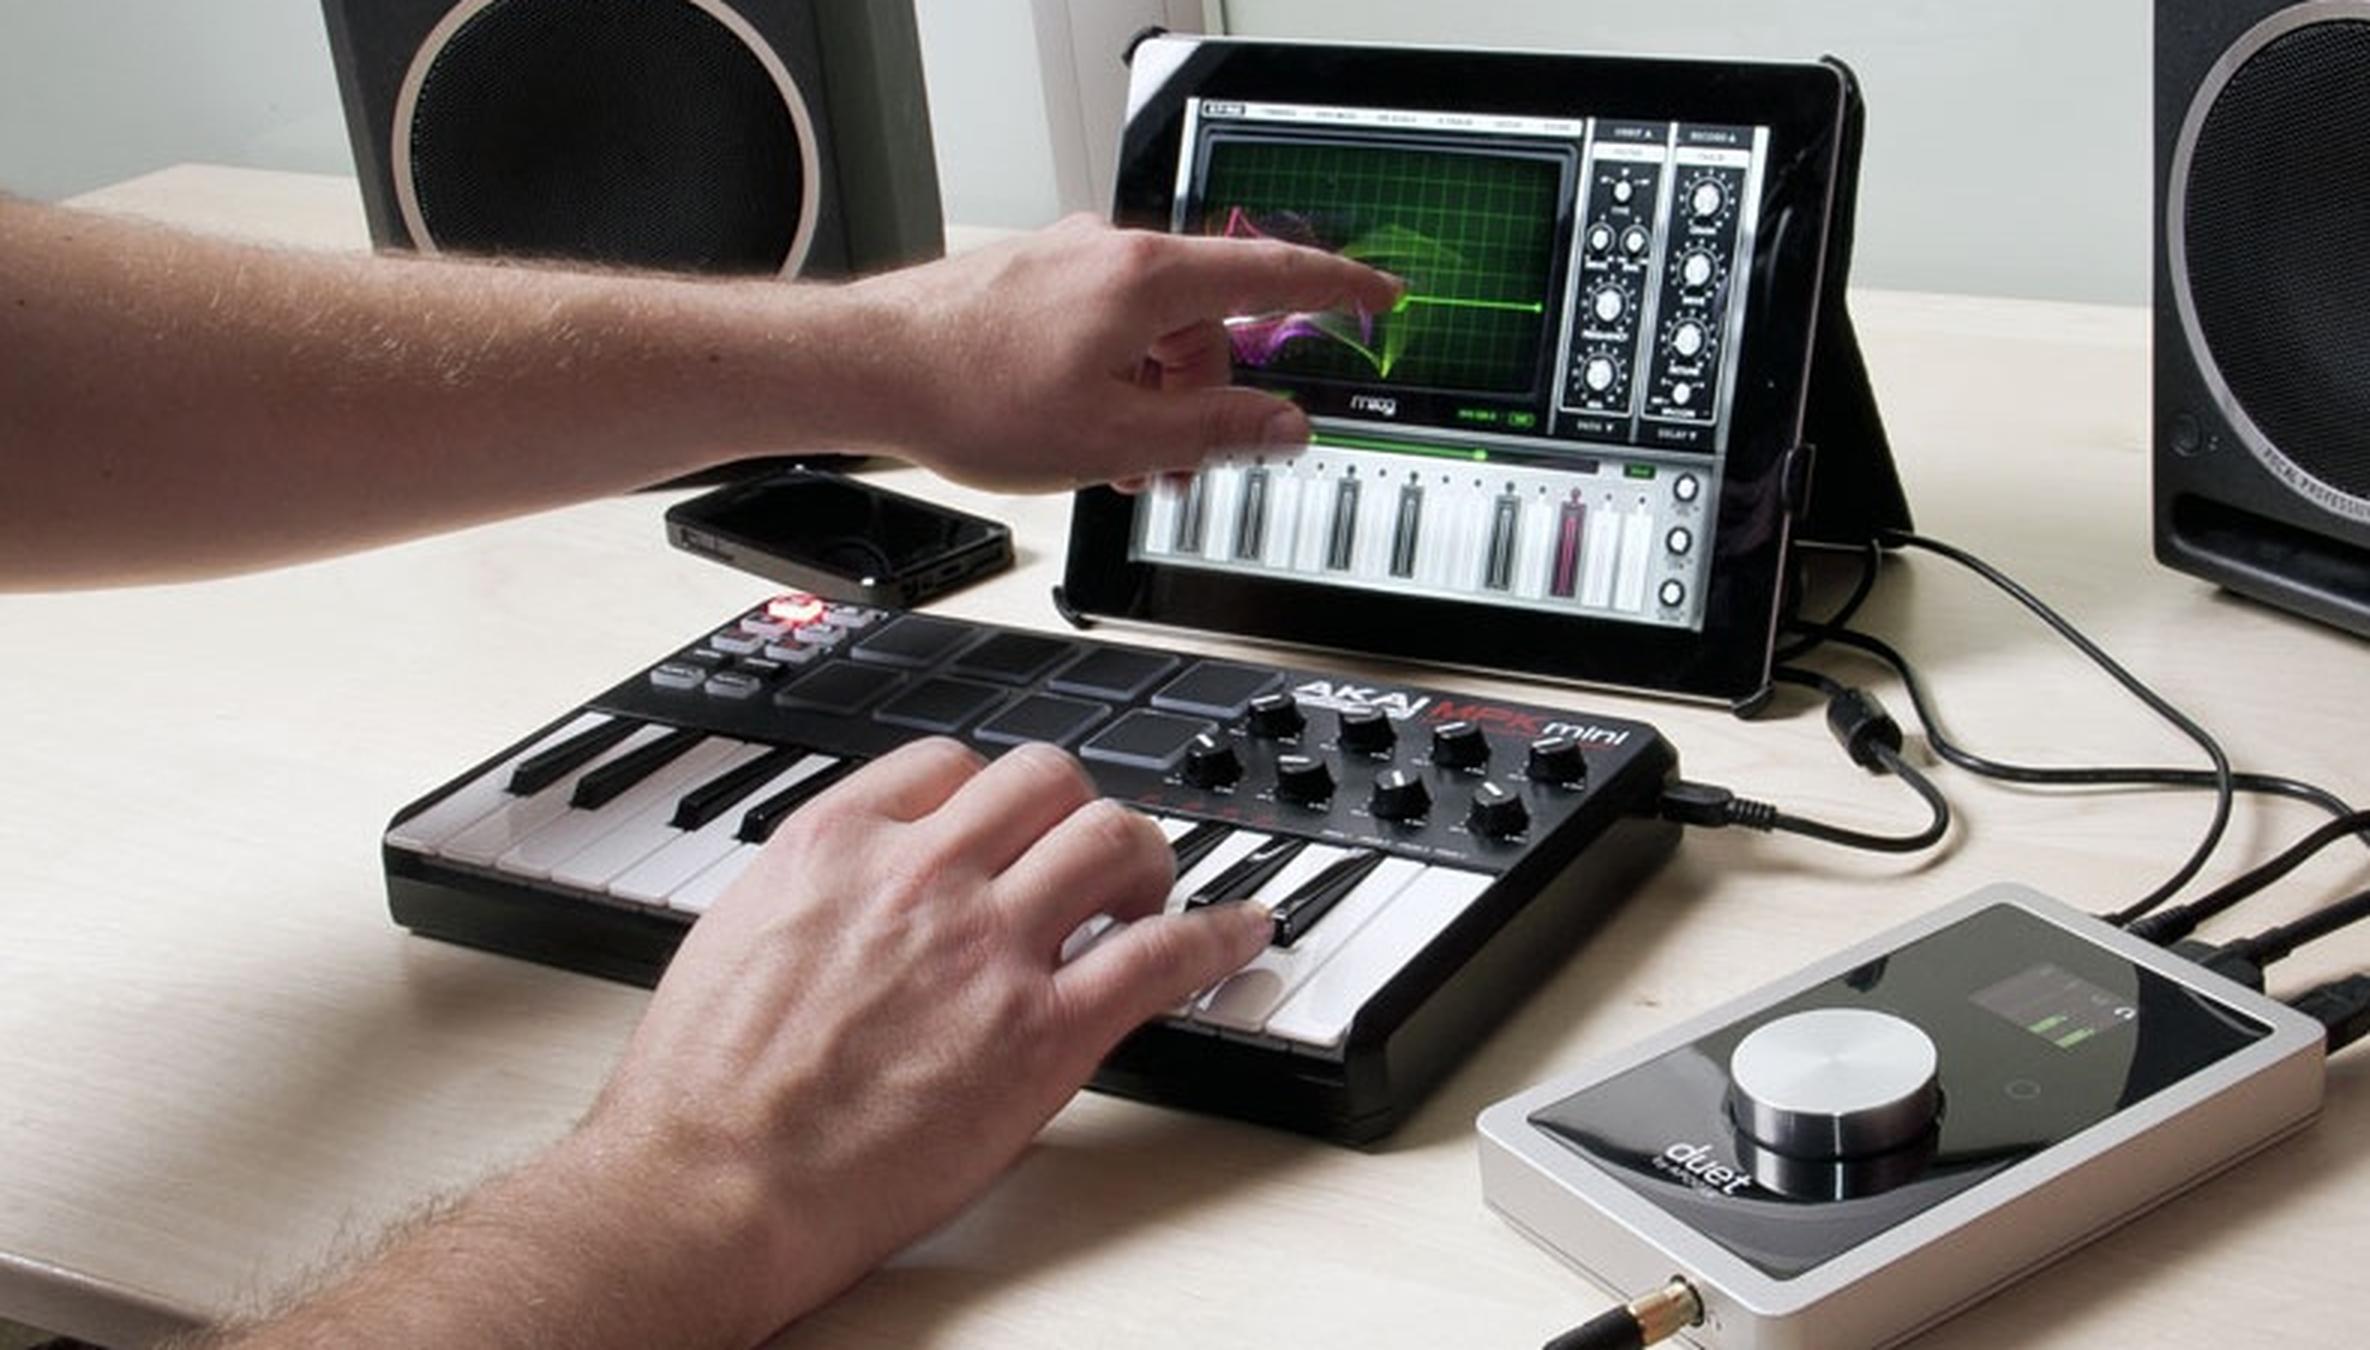 Apogee Duet Offers Great Audio Interface for iPad and Mac